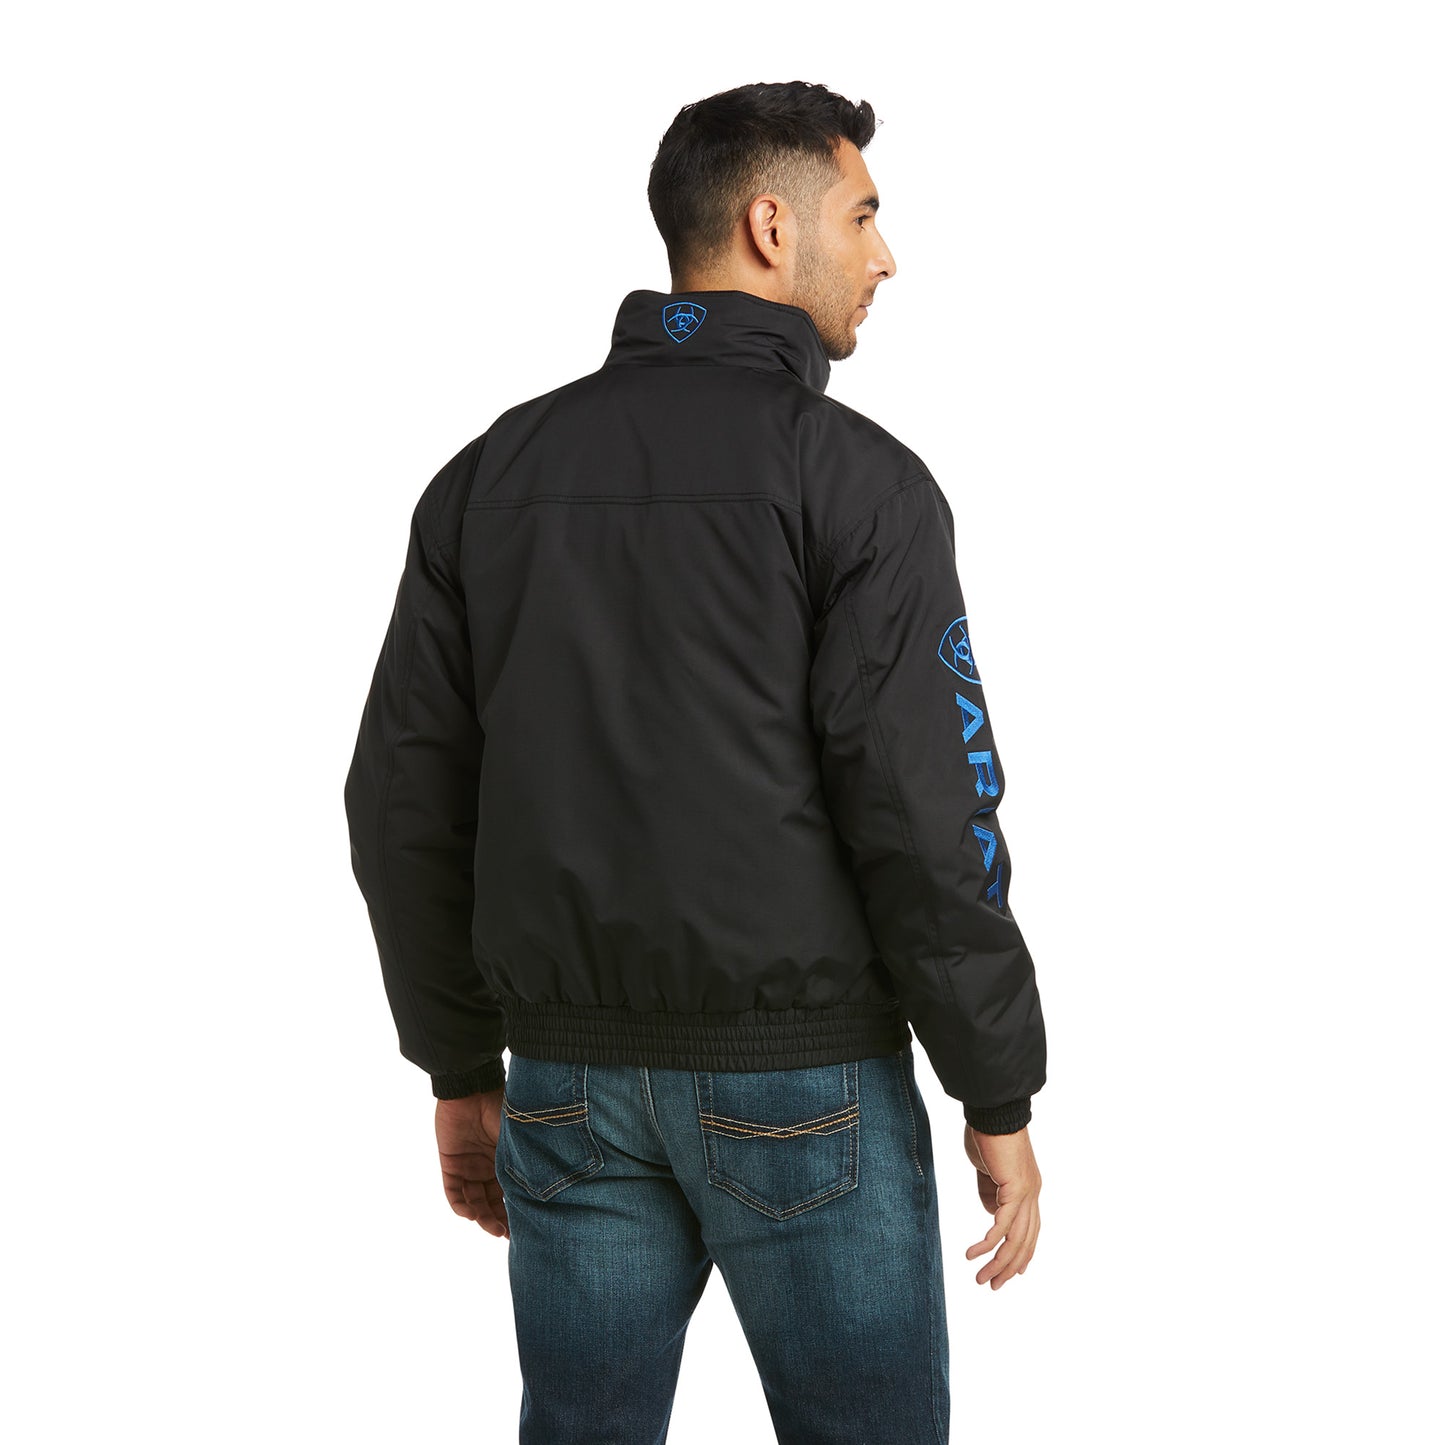 Ariat Men's Team Logo Concealed Carry Black Insulated Jacket 10037539